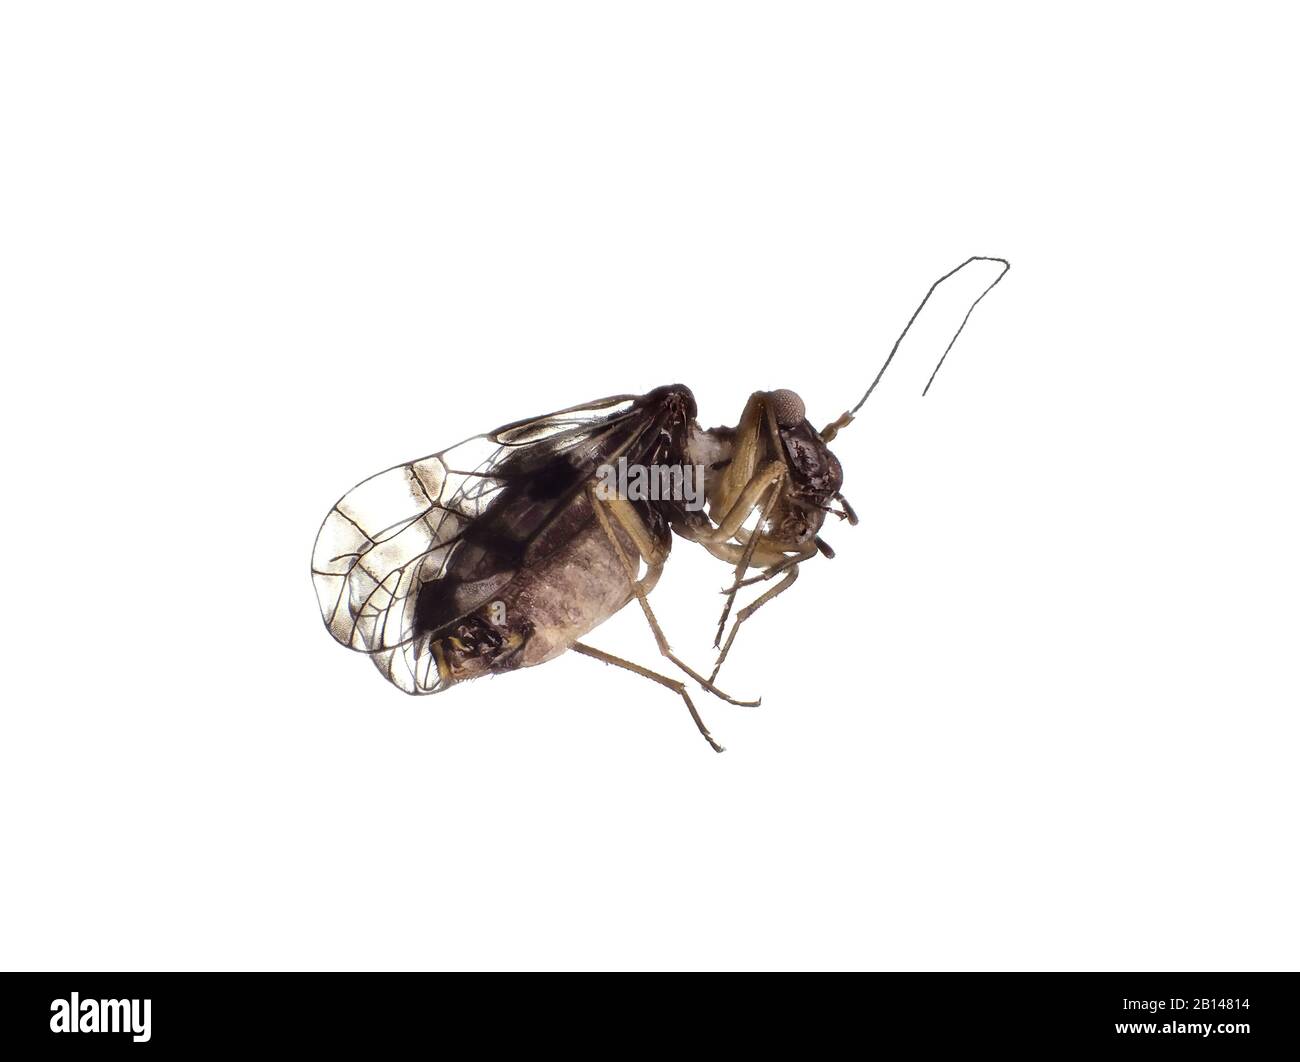 Tiny adult barklouse (Psocoptera), about 2mm in length without antennas, under the microscope Stock Photo